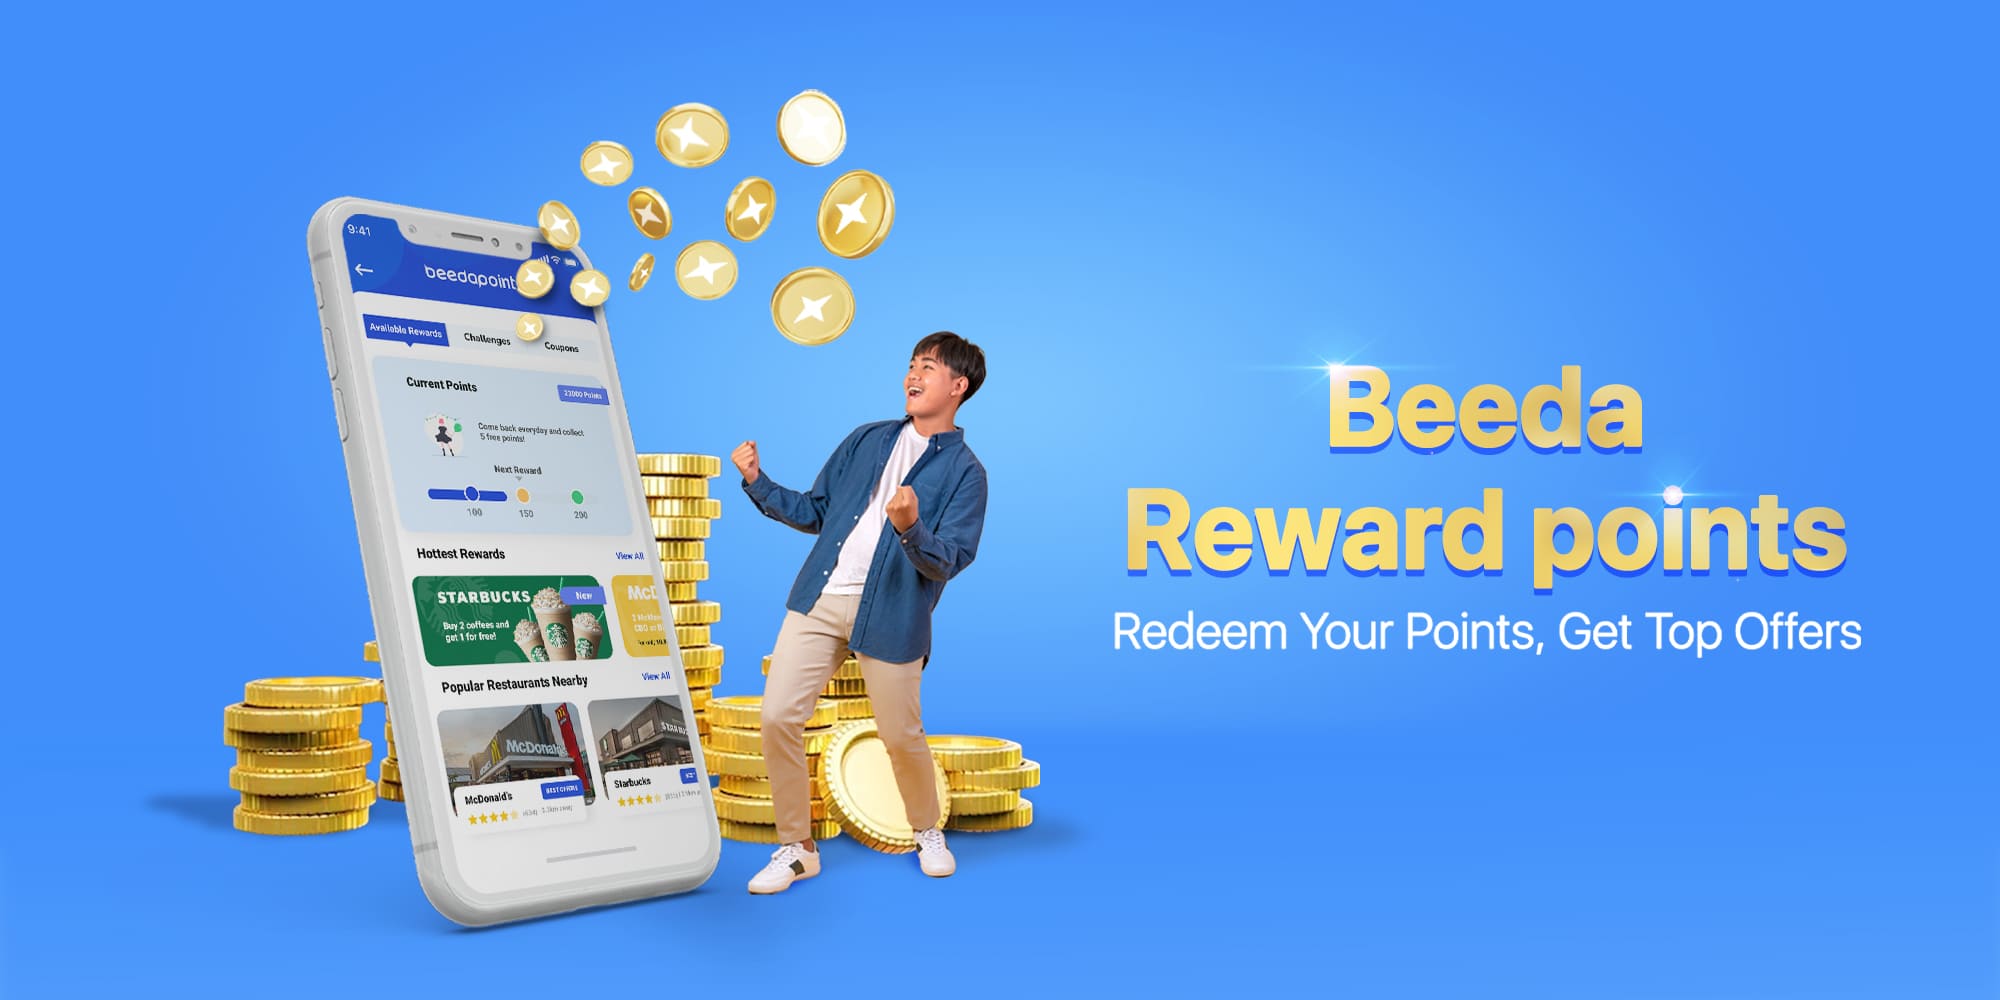 Beeda Reward Points: An Opportunity to Enjoy Exciting Offers